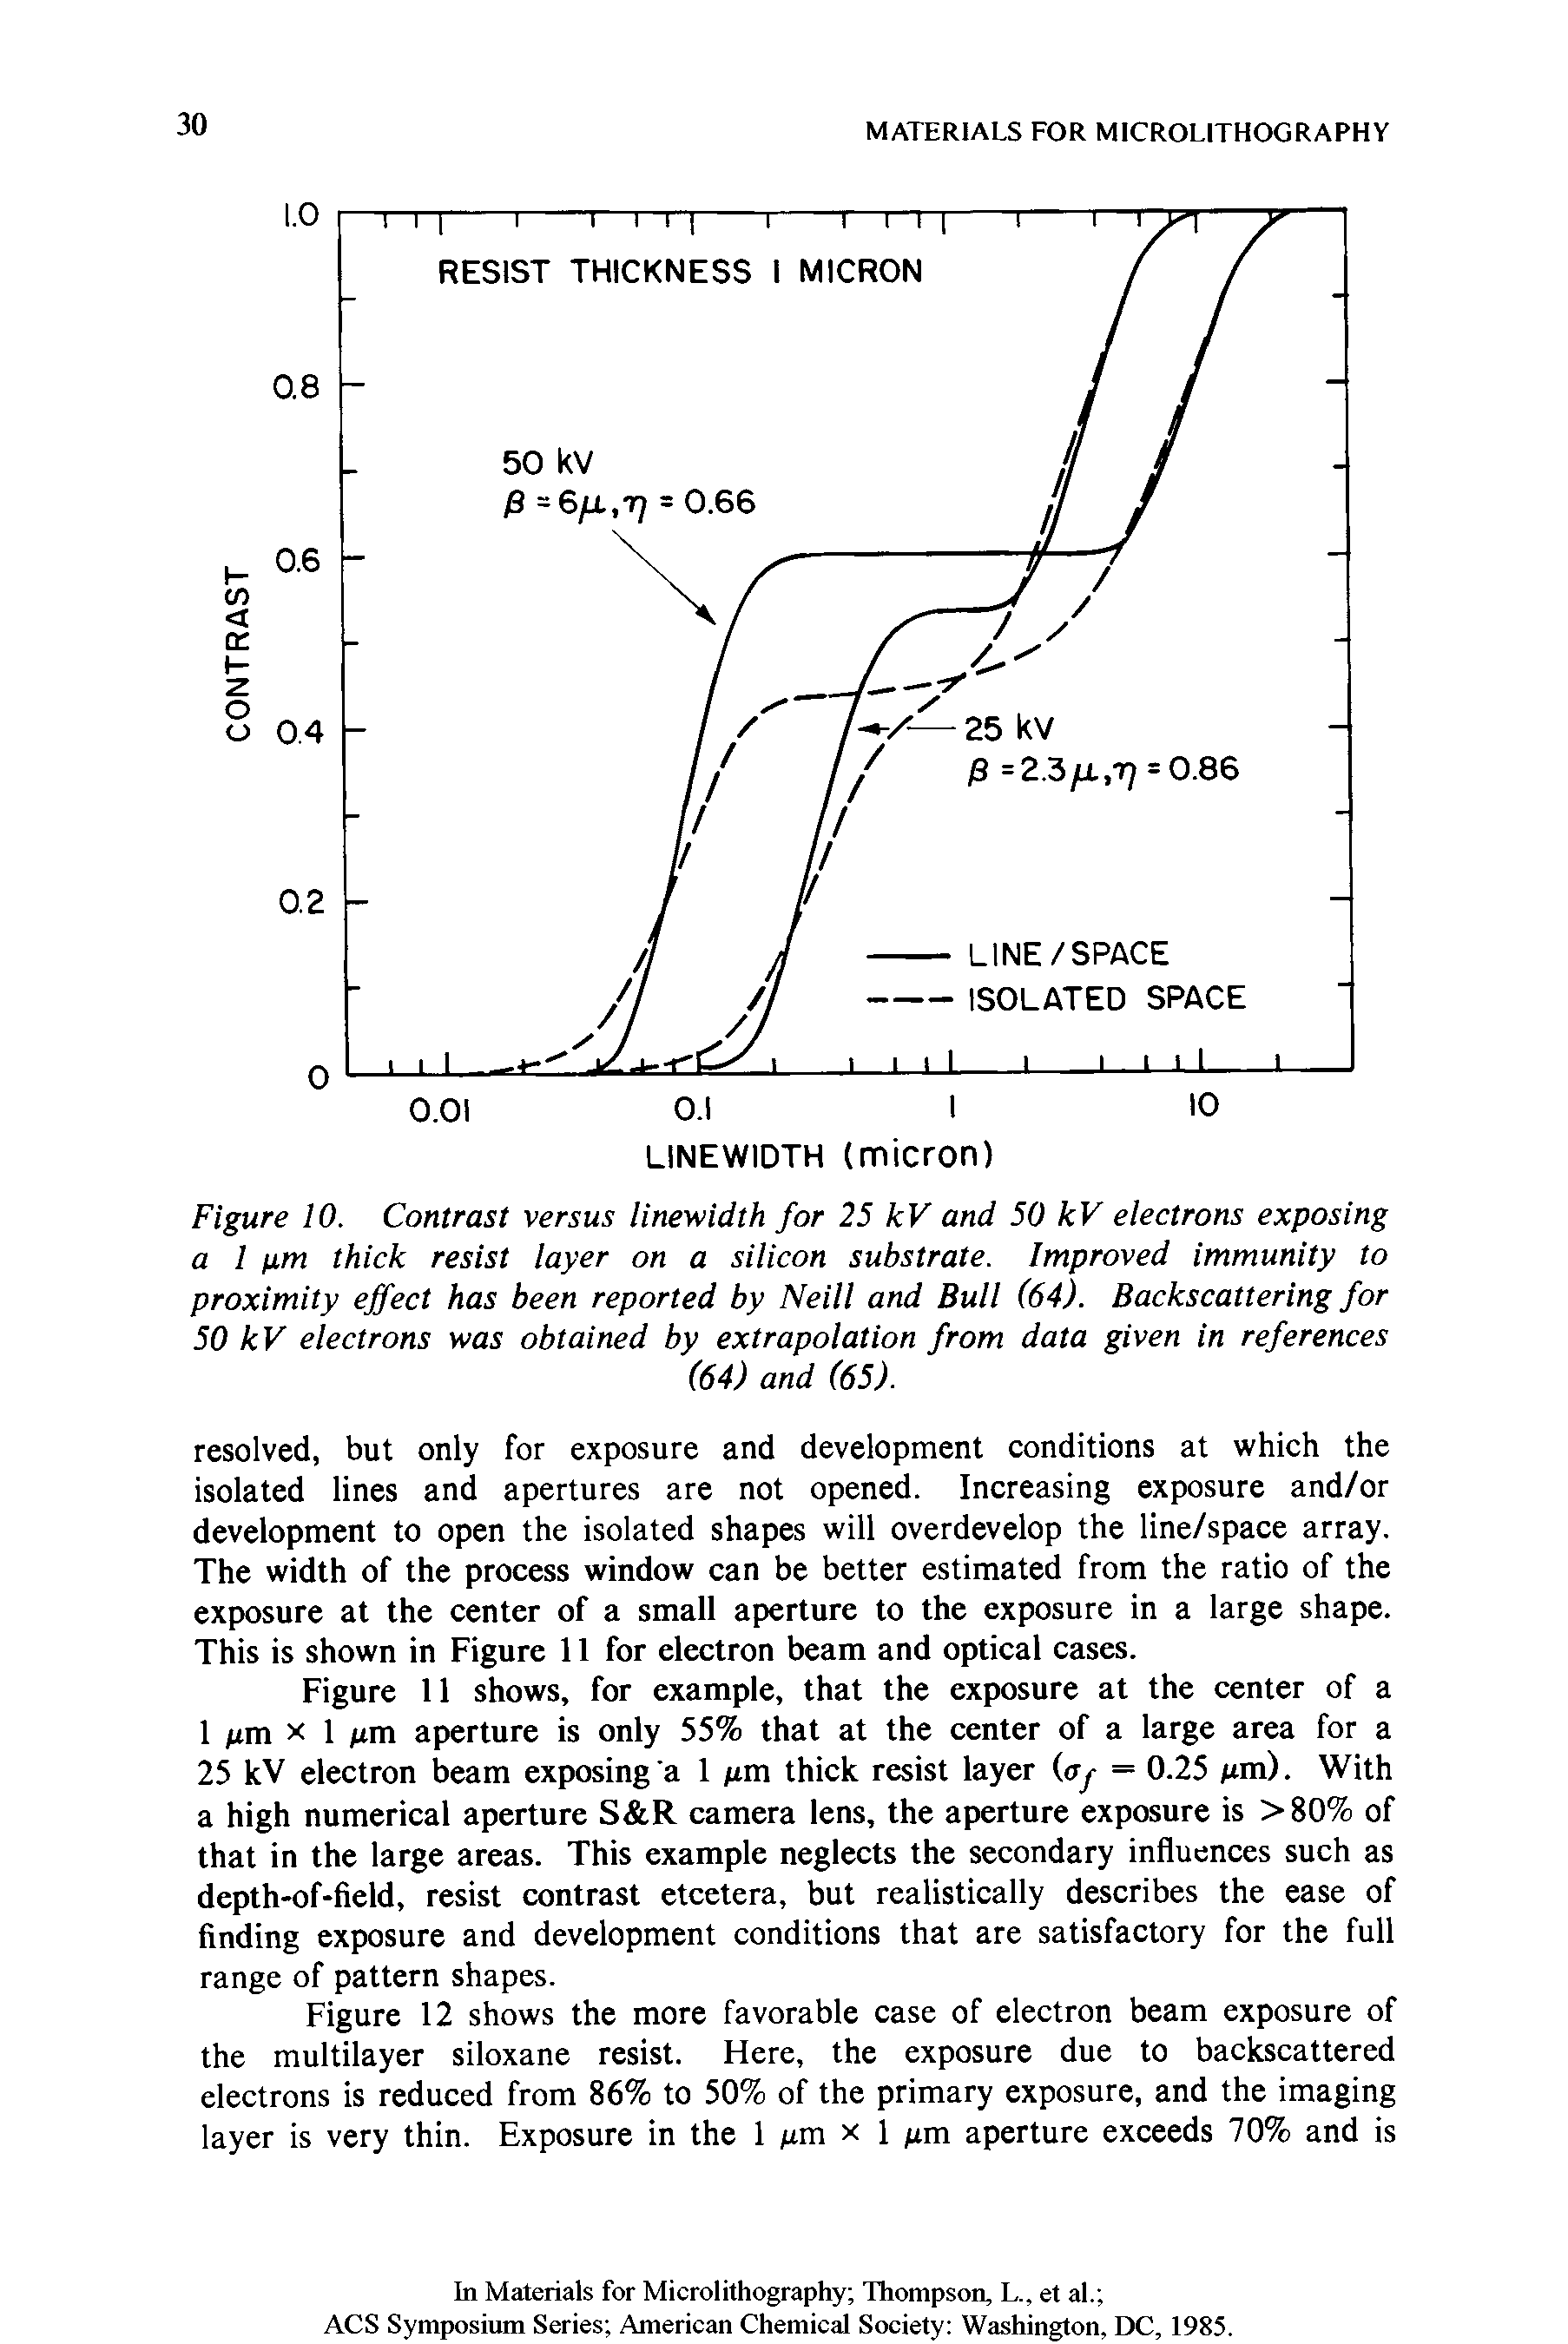 Figure 10. Contrast versus linewidth for 25 kV and 50 kV electrons exposing a 1 / thick resist layer on a silicon substrate. Improved immunity to proximity effect has been reported by Neill and Bull (64). Backscattering for 50 kV electrons was obtained by extrapolation from data given in references...